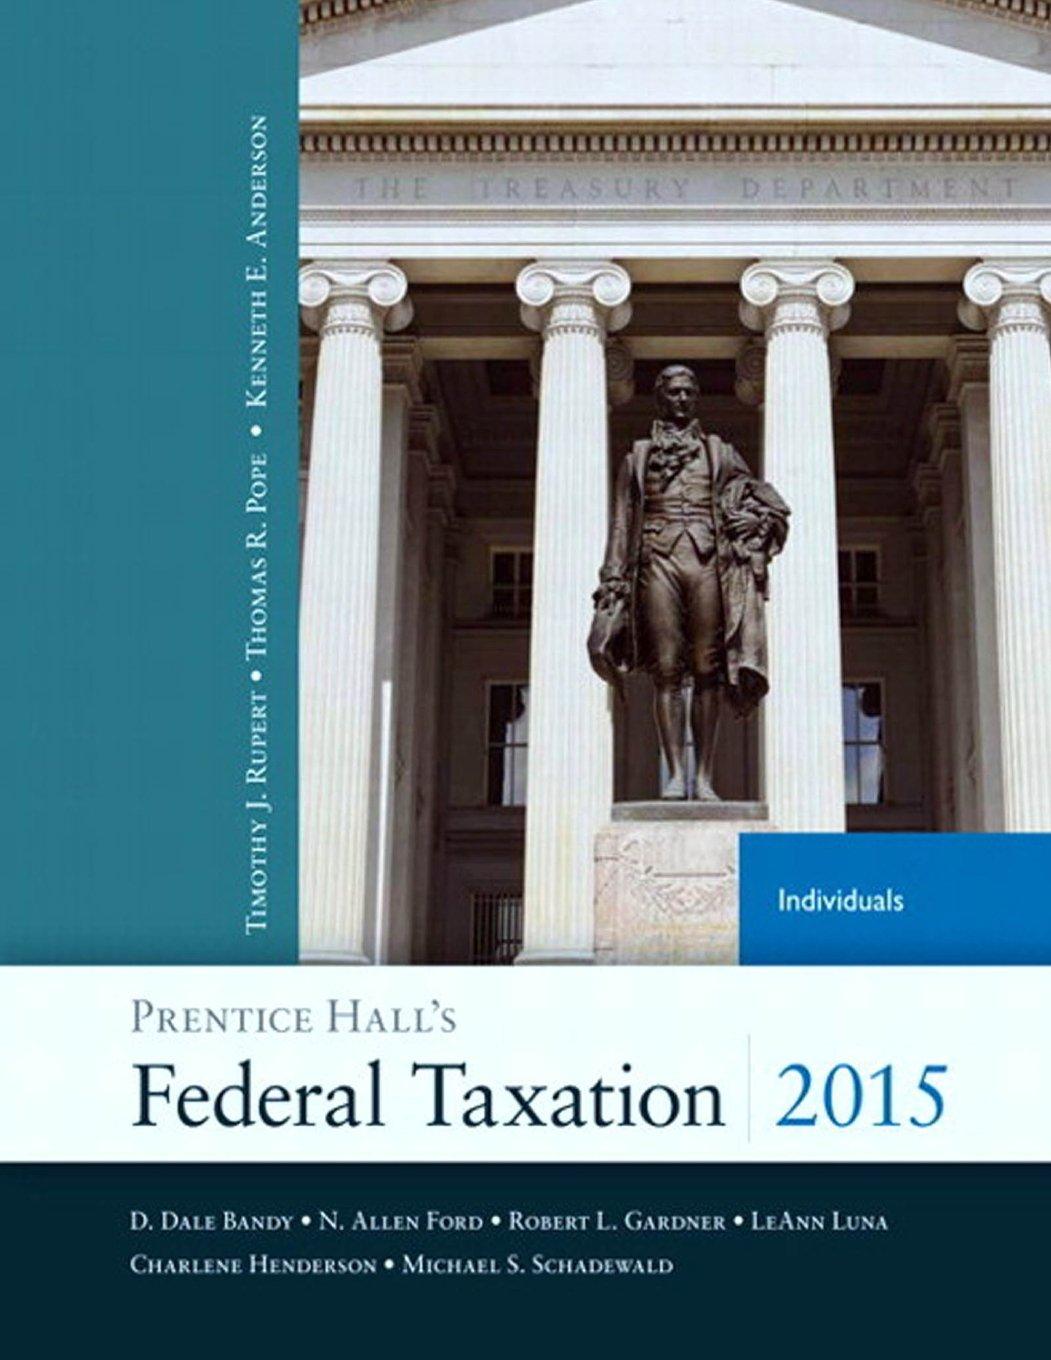 prentice halls federal taxation 2015 individuals 28th edition timothy j. rupert, thomas r. pope, kenneth e.